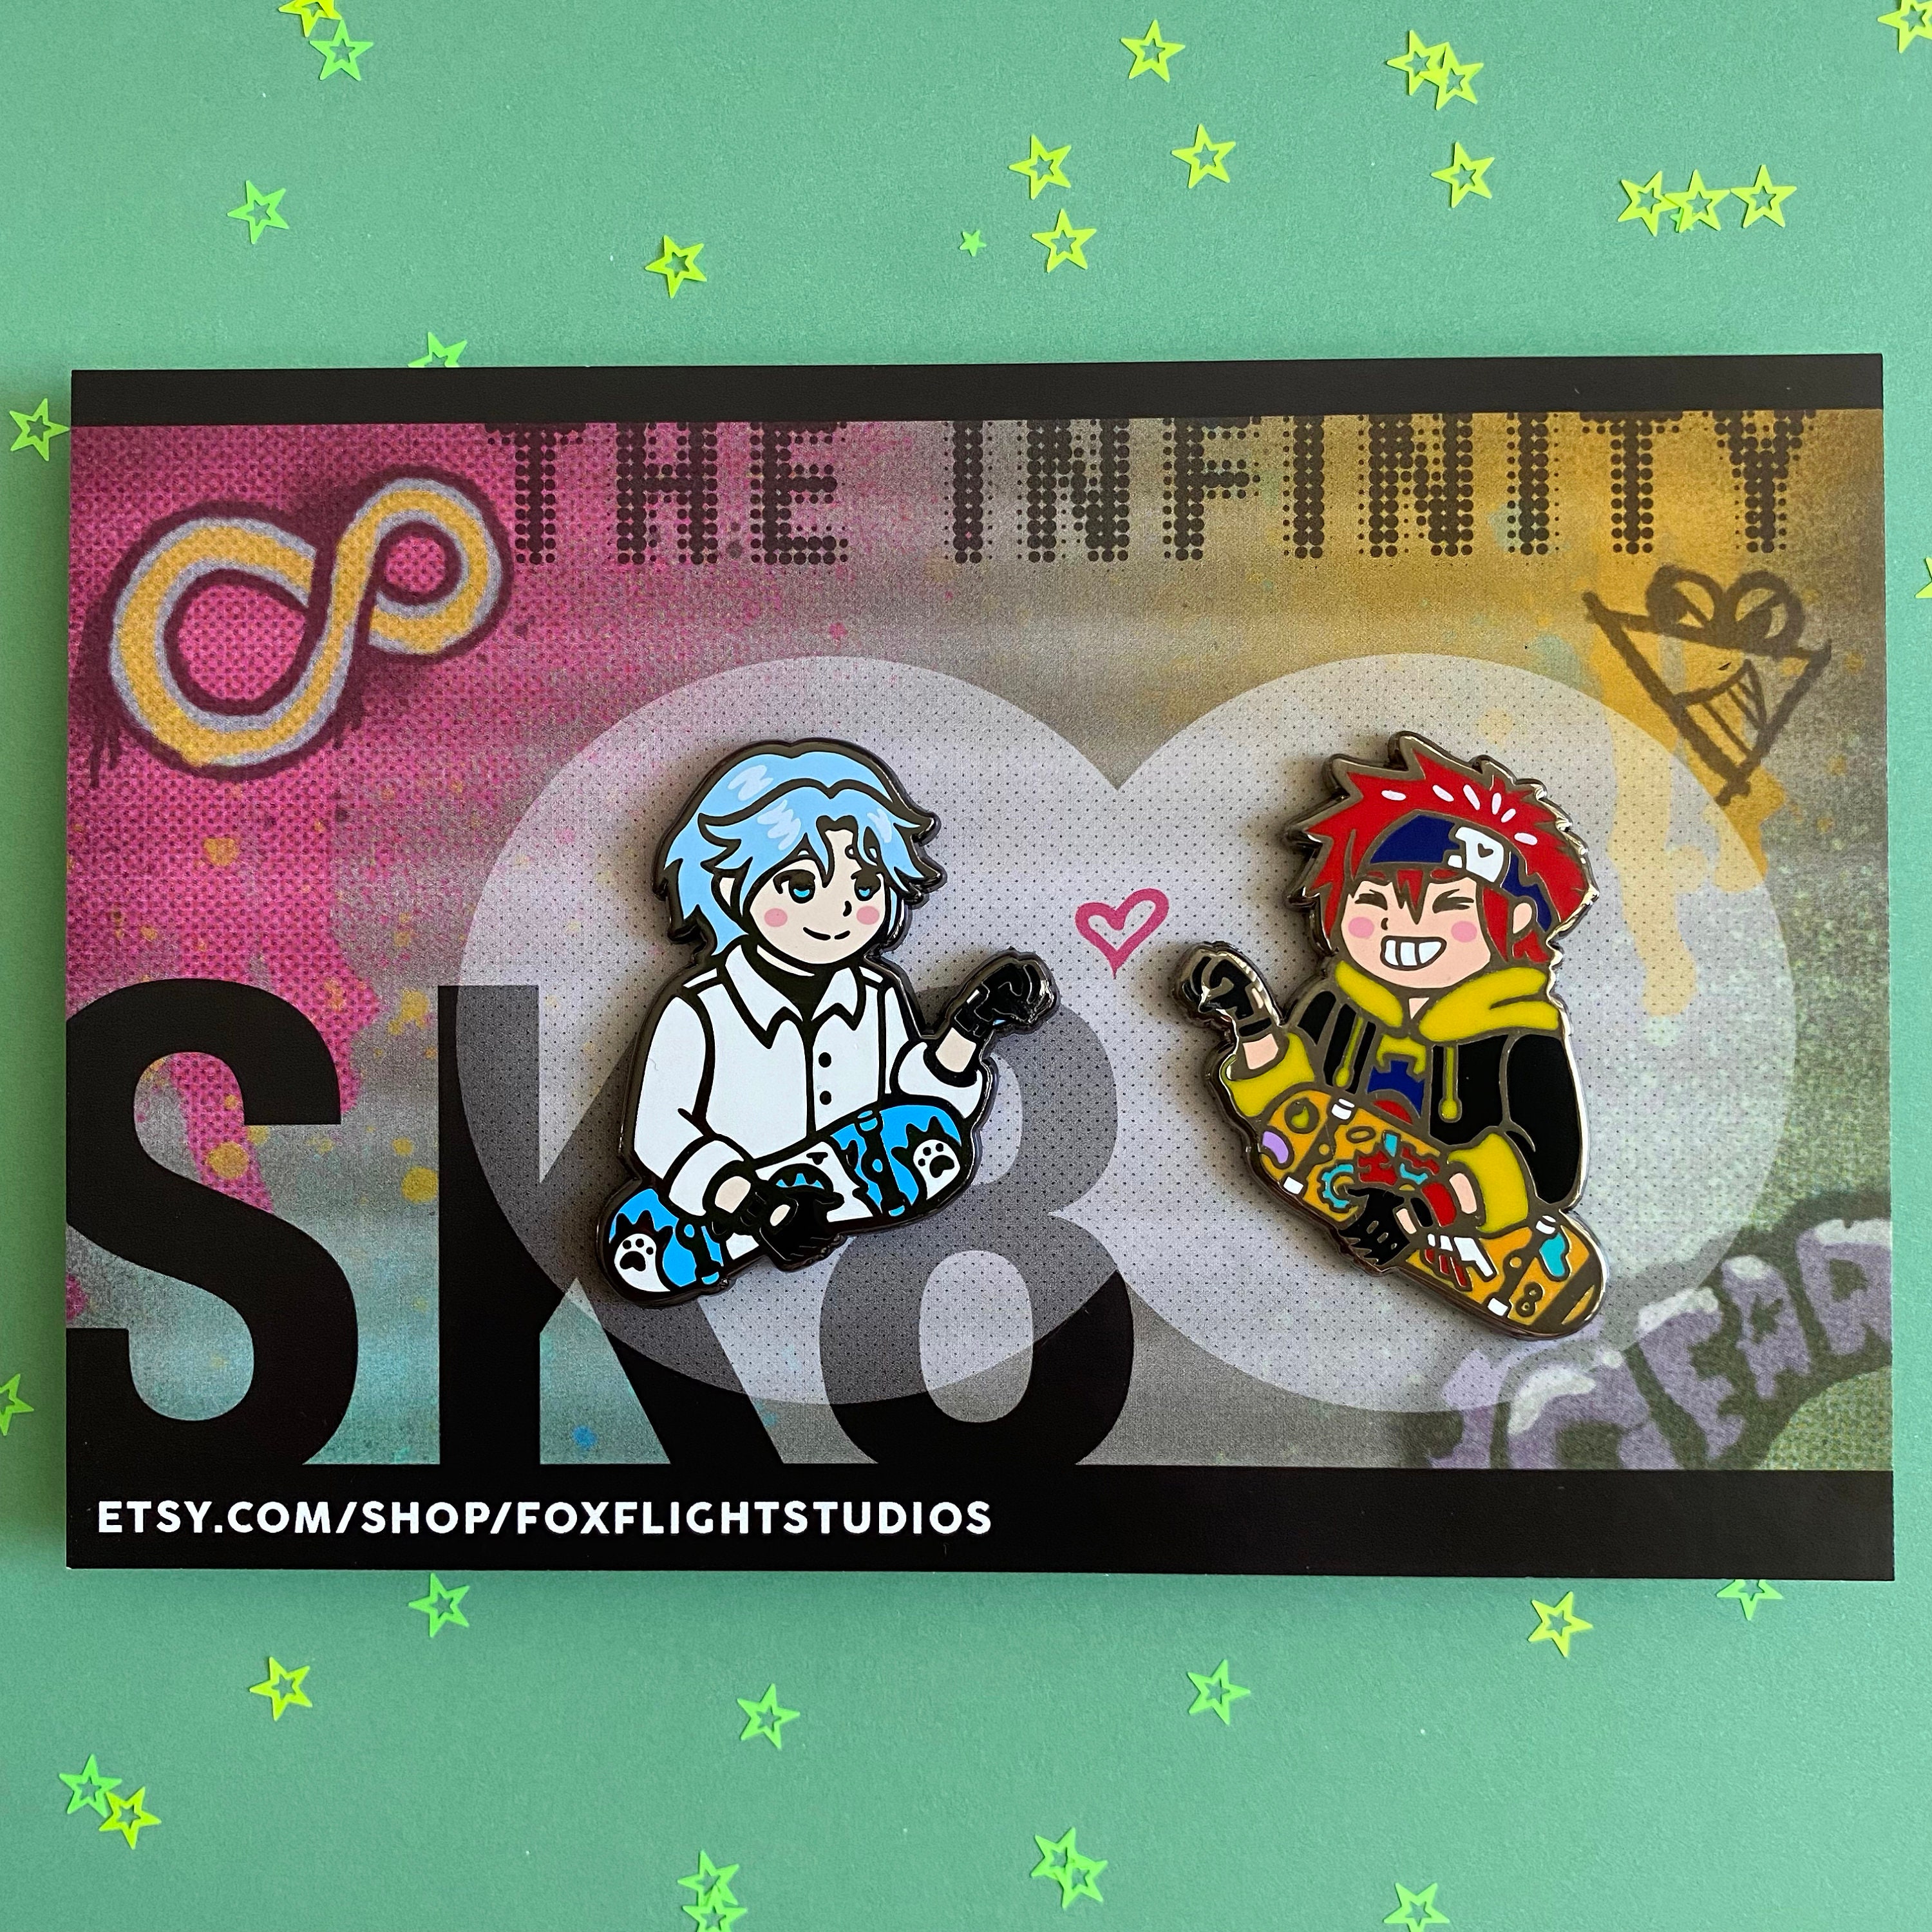 SK8 the Infinity - Happy birthday to the founder of S and the